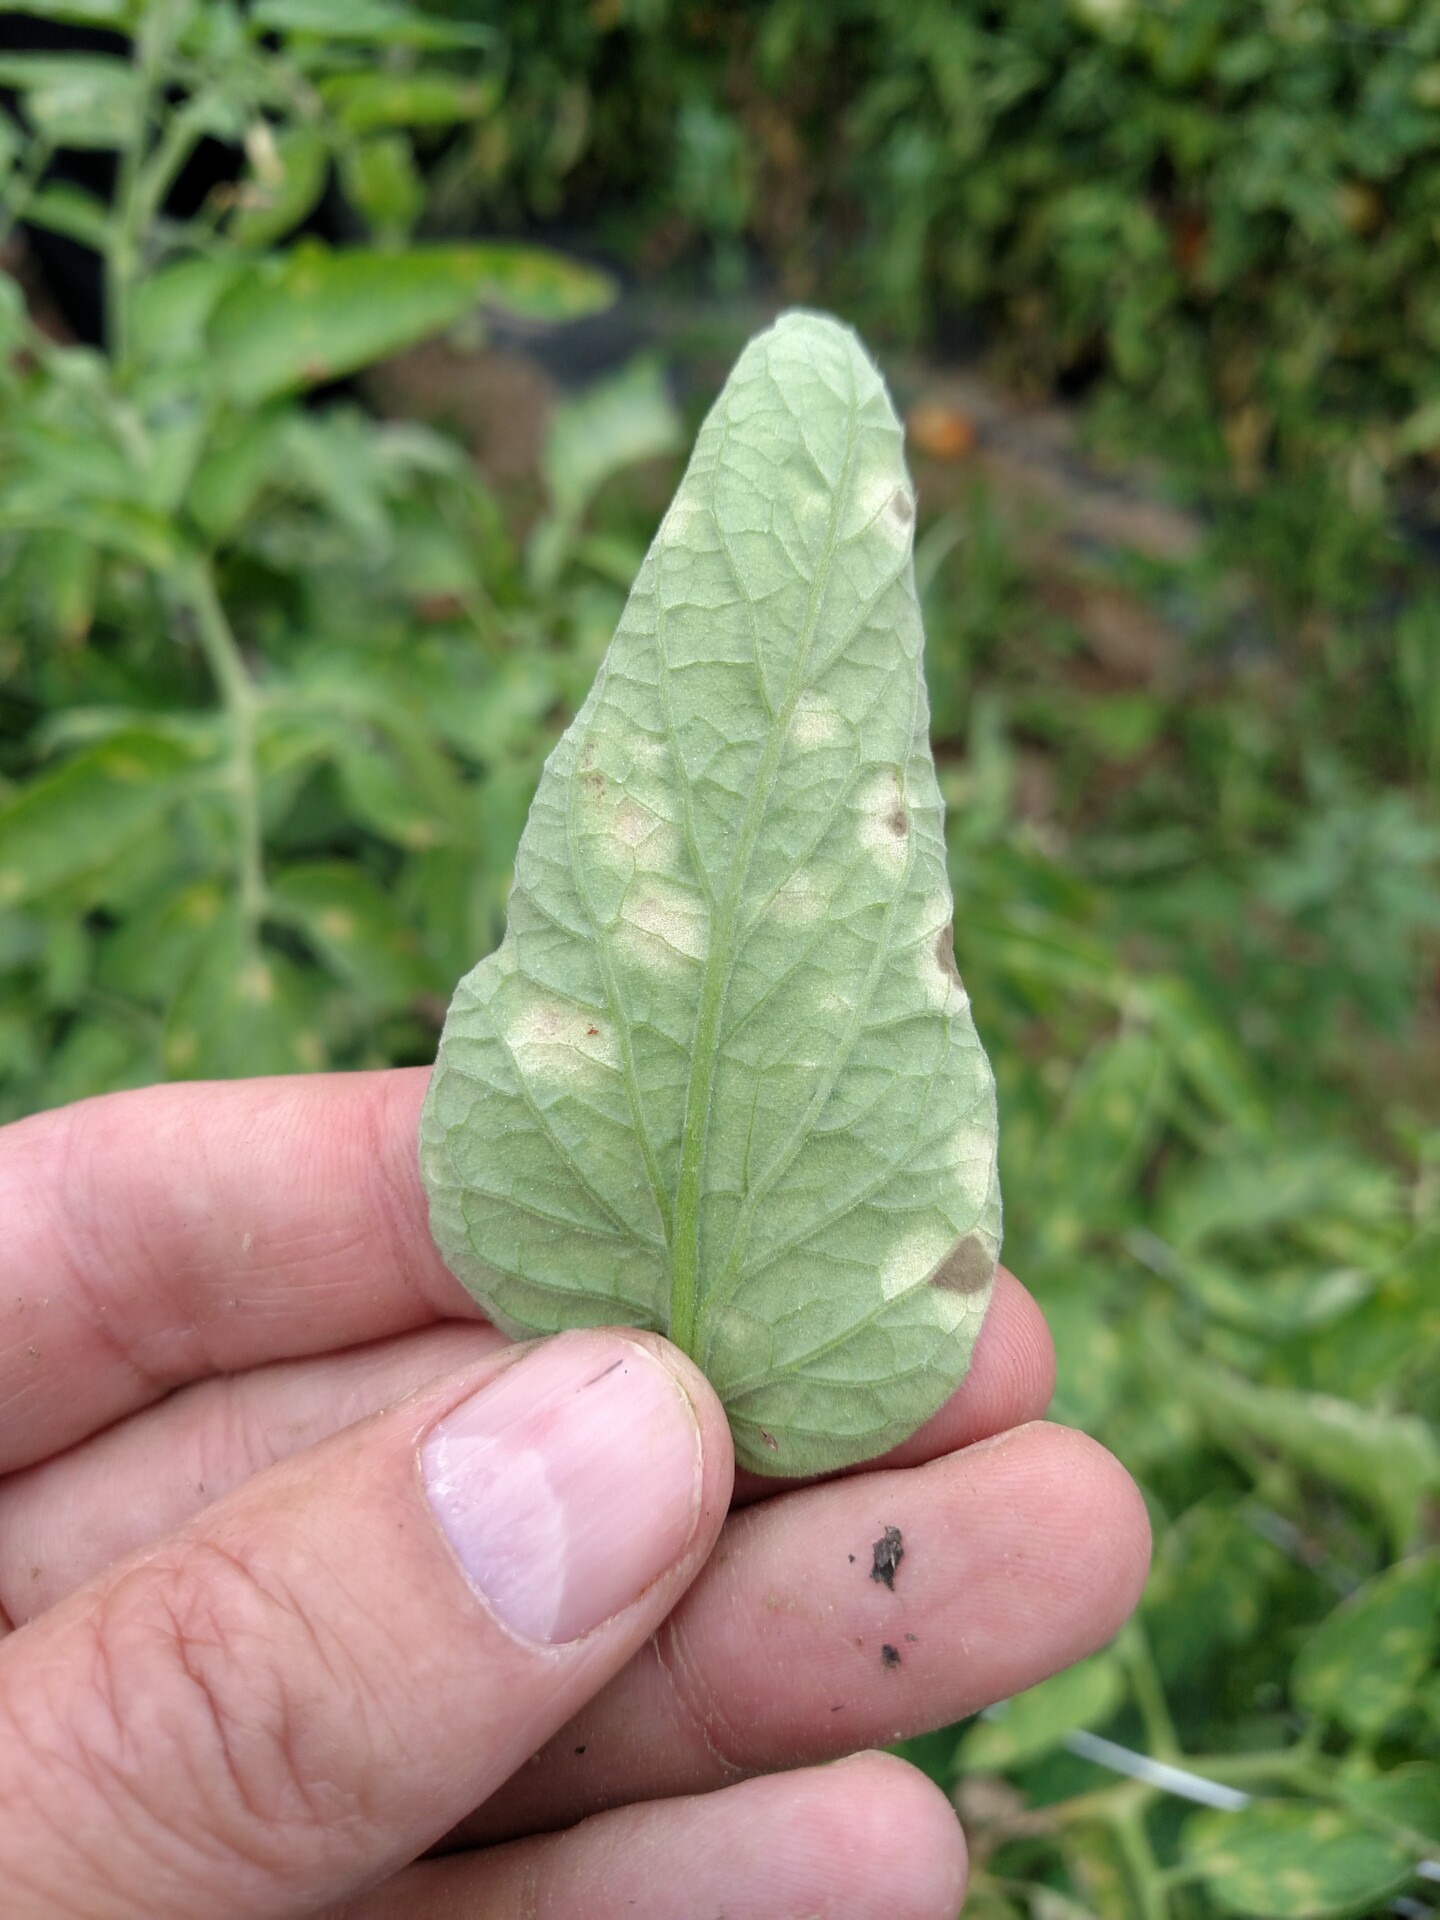 Figure 3. Underside of tomato leaf with leaf mold showing sporulation of causal fungus just starting.